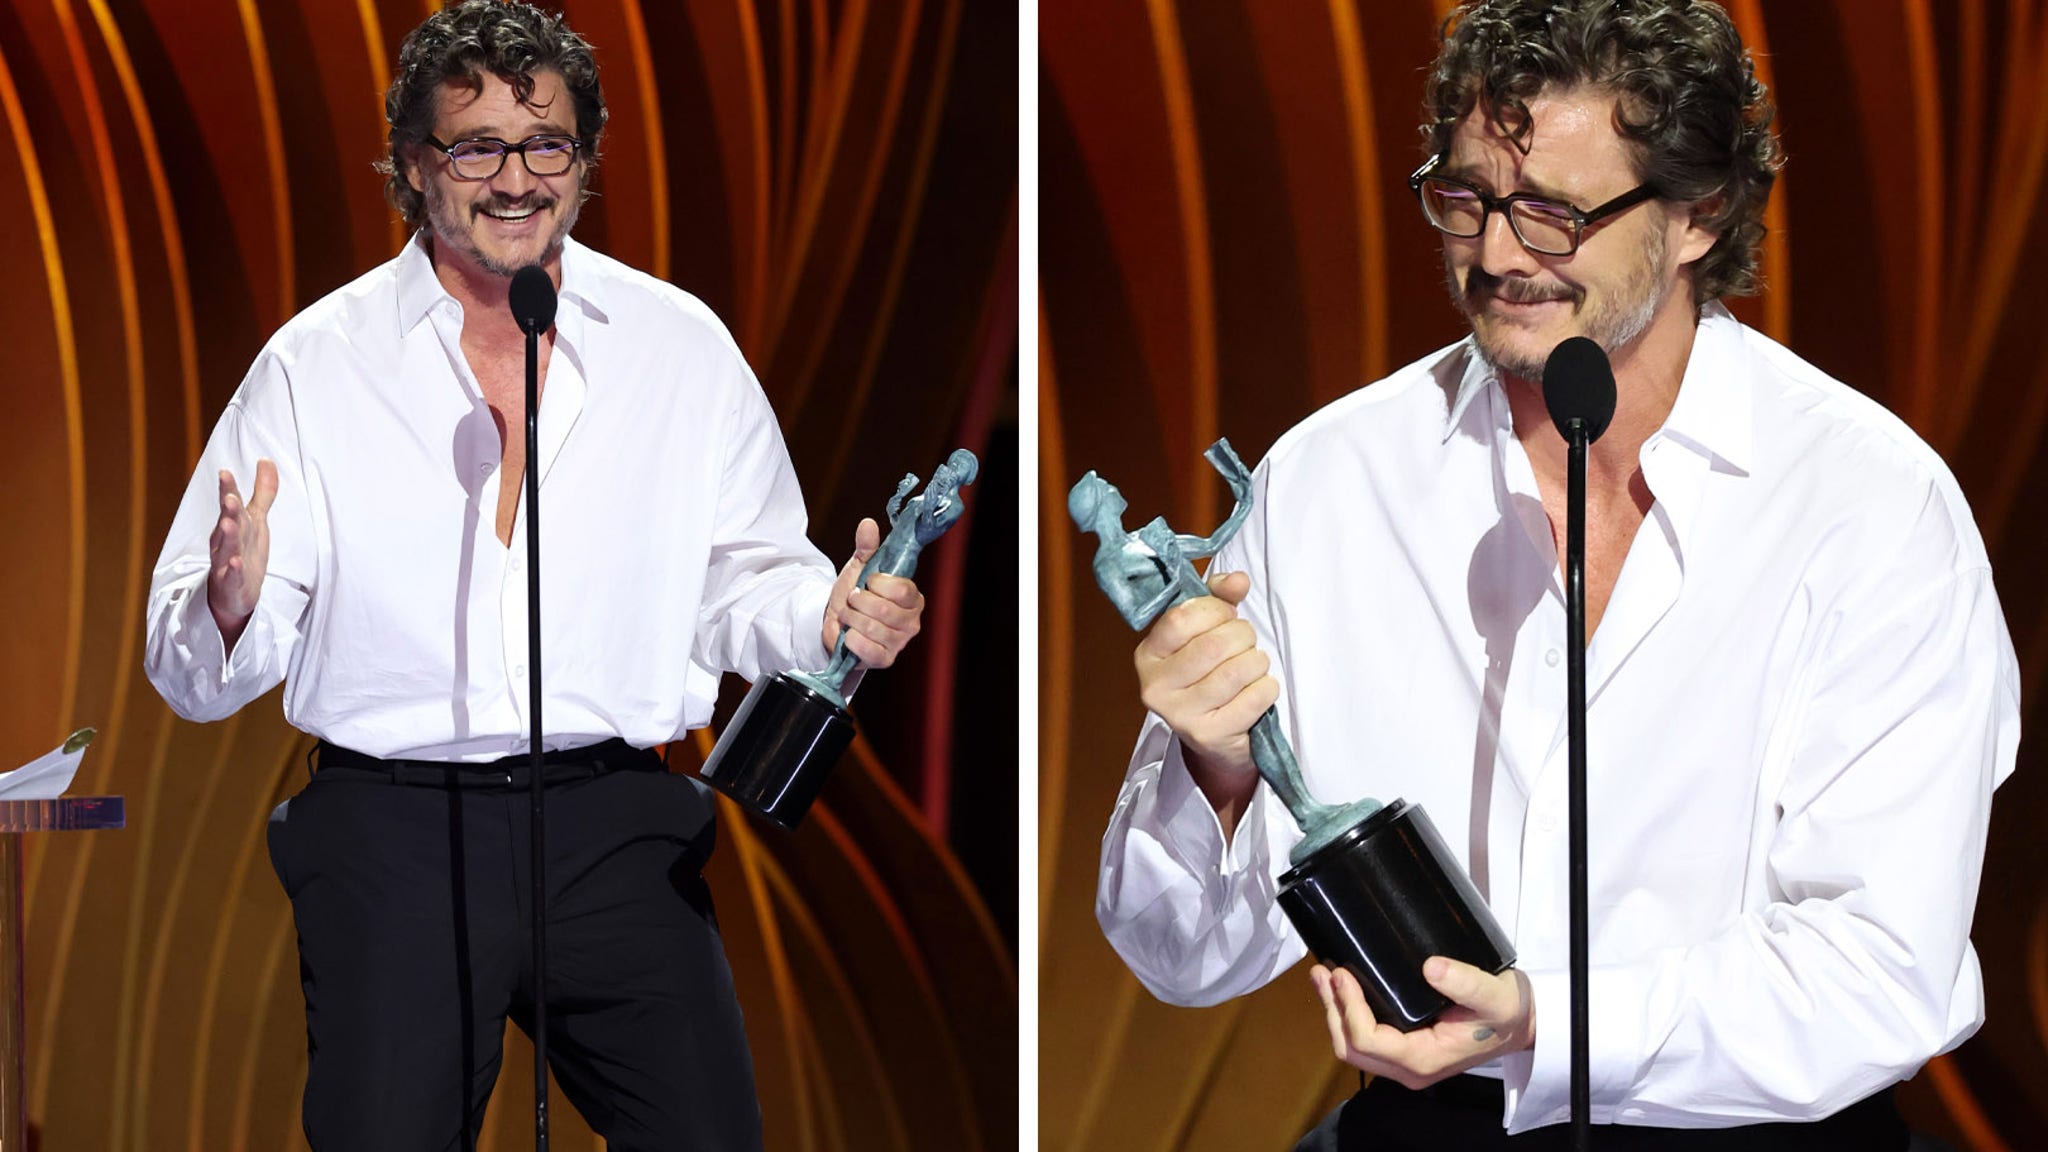 'Drunk' Pedro Pascal Shocked by SAG Award Win for Last of Us: 'I'm Making a Fool of Myself'